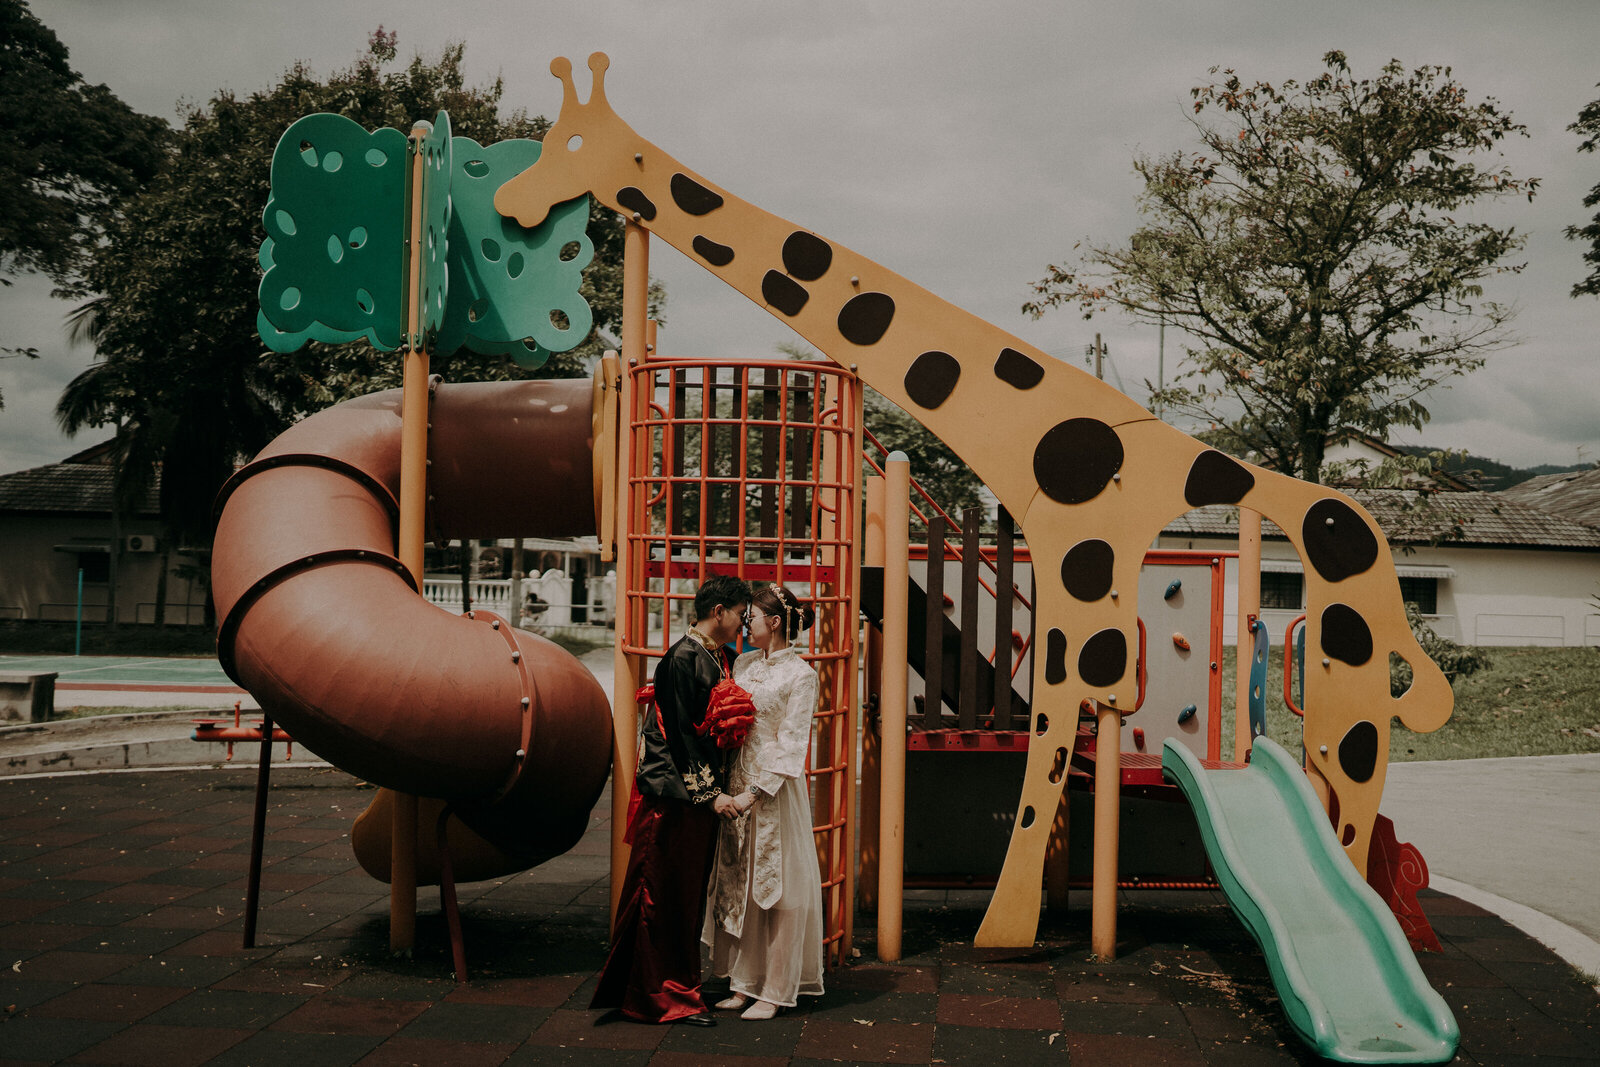 couple in the playground